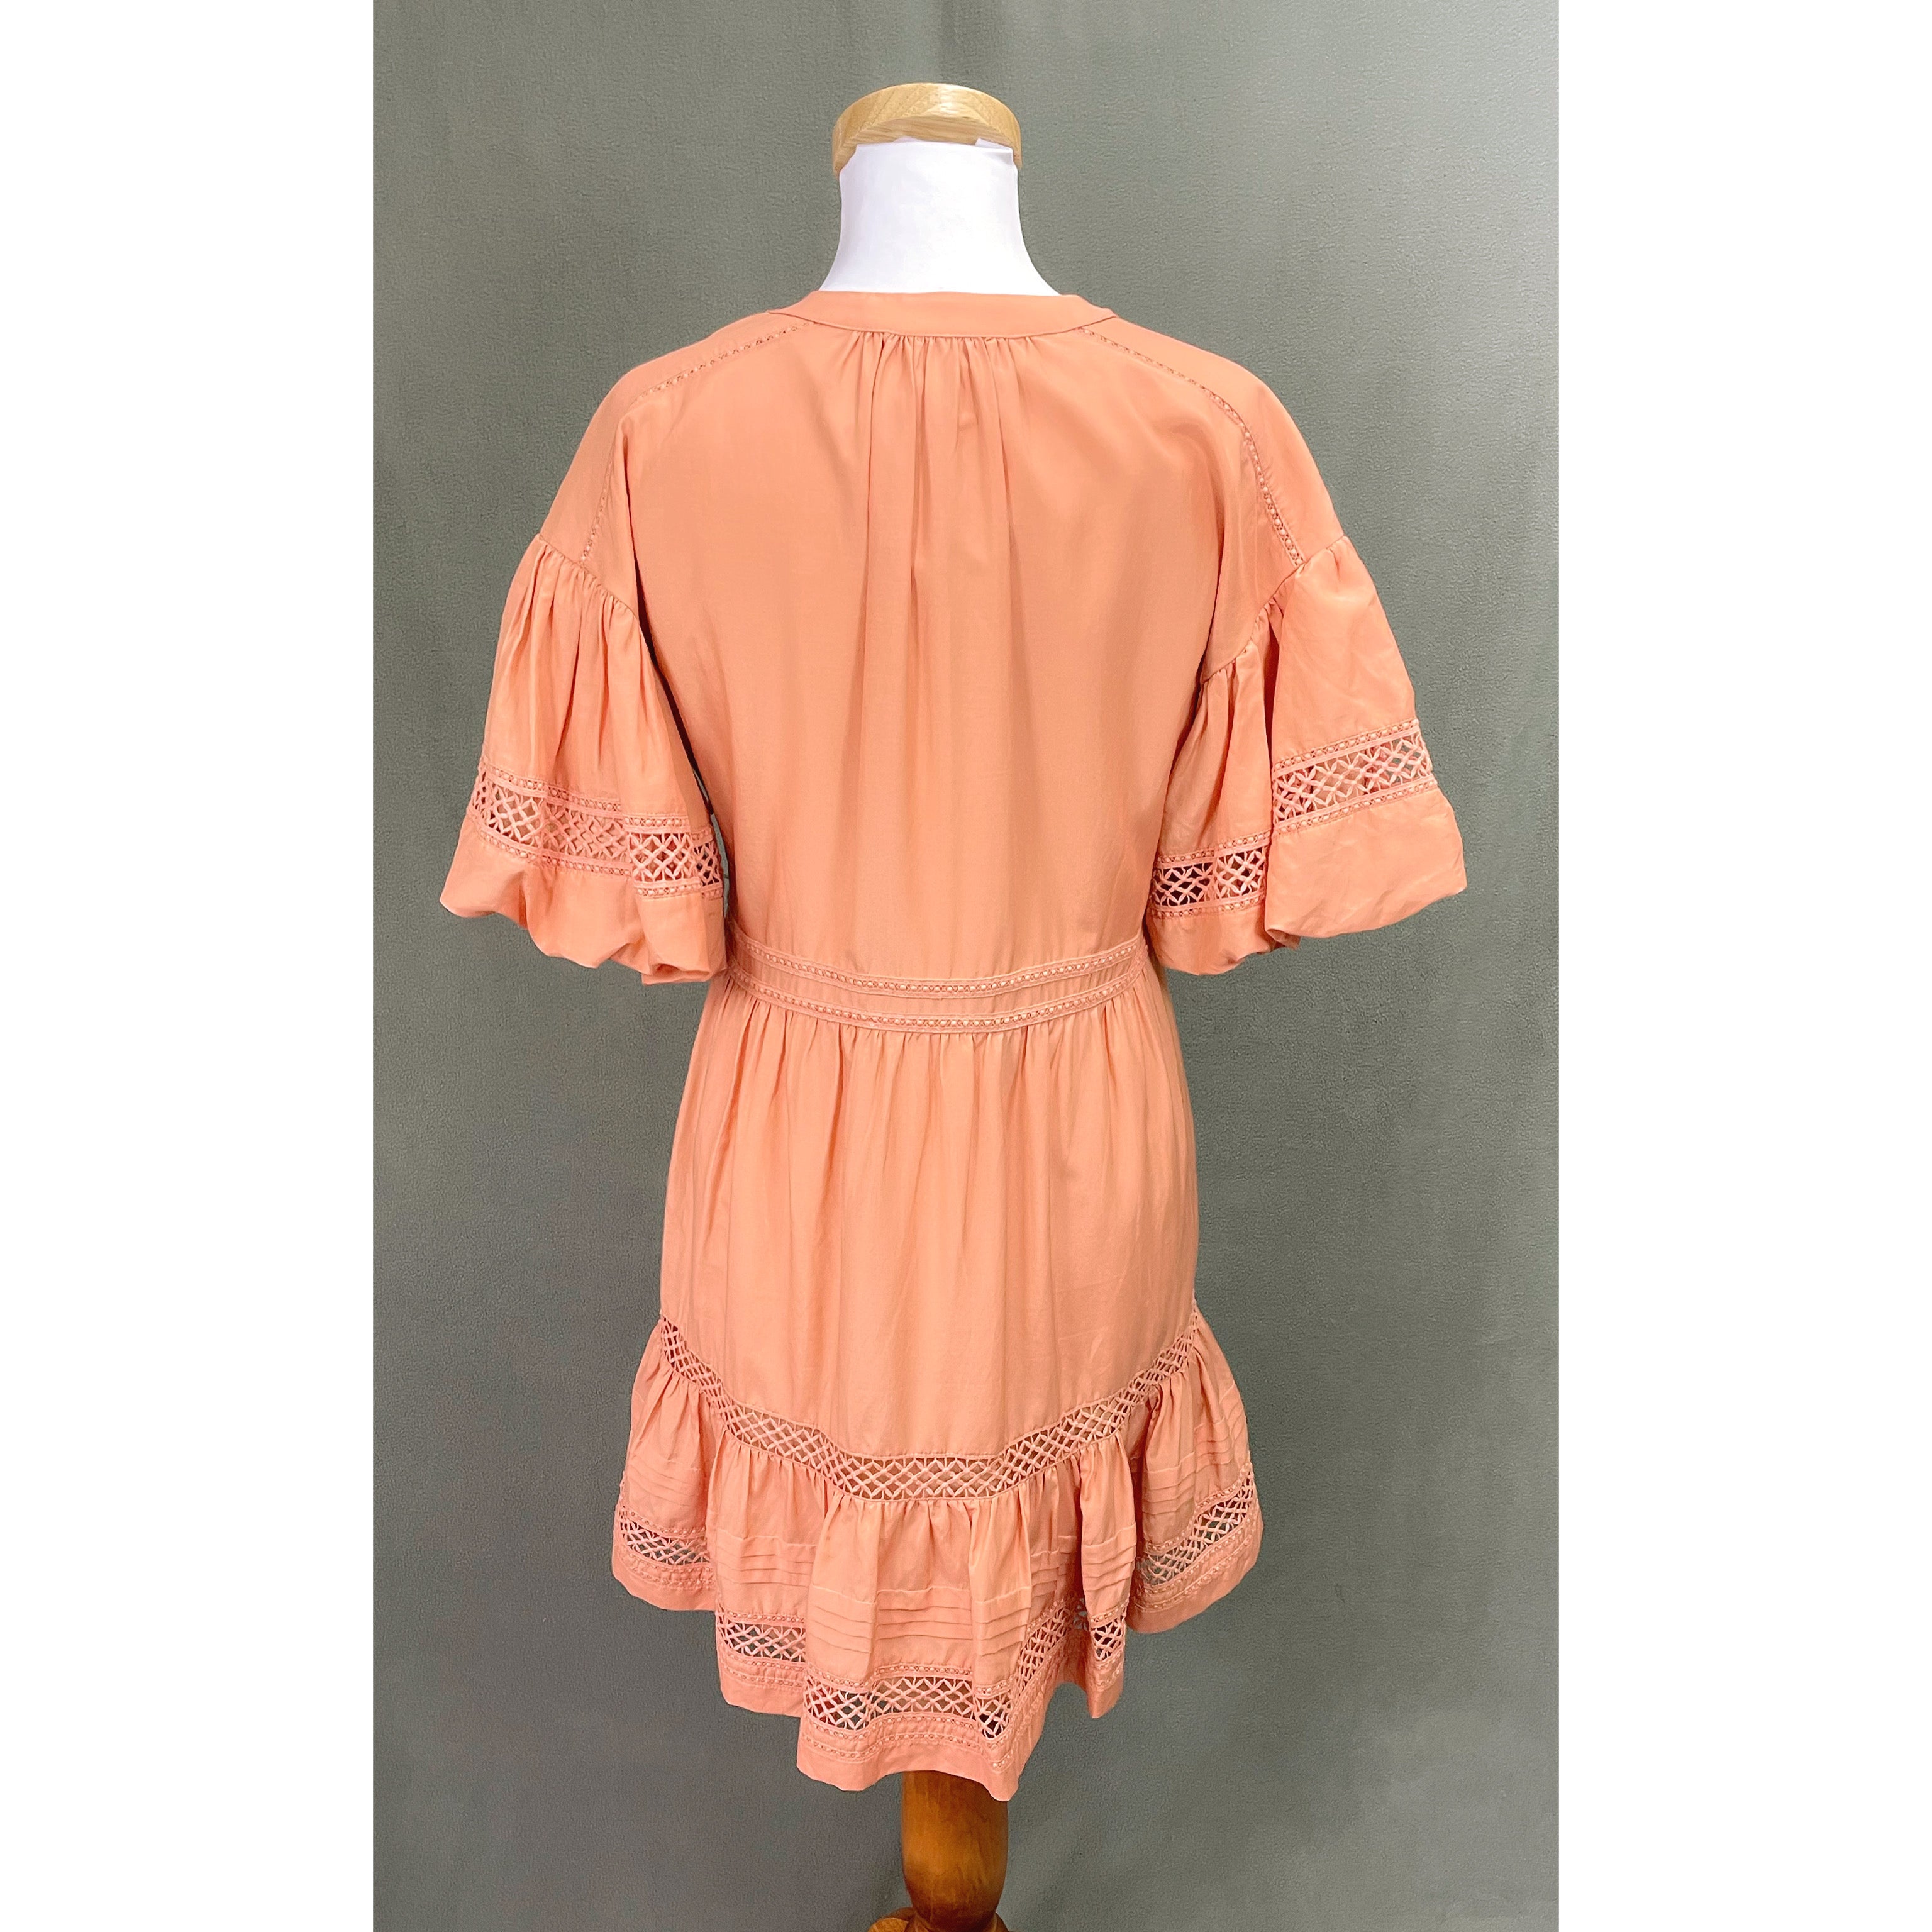 Marie Oliver peach dress, size S, NEW WITH TAGS!